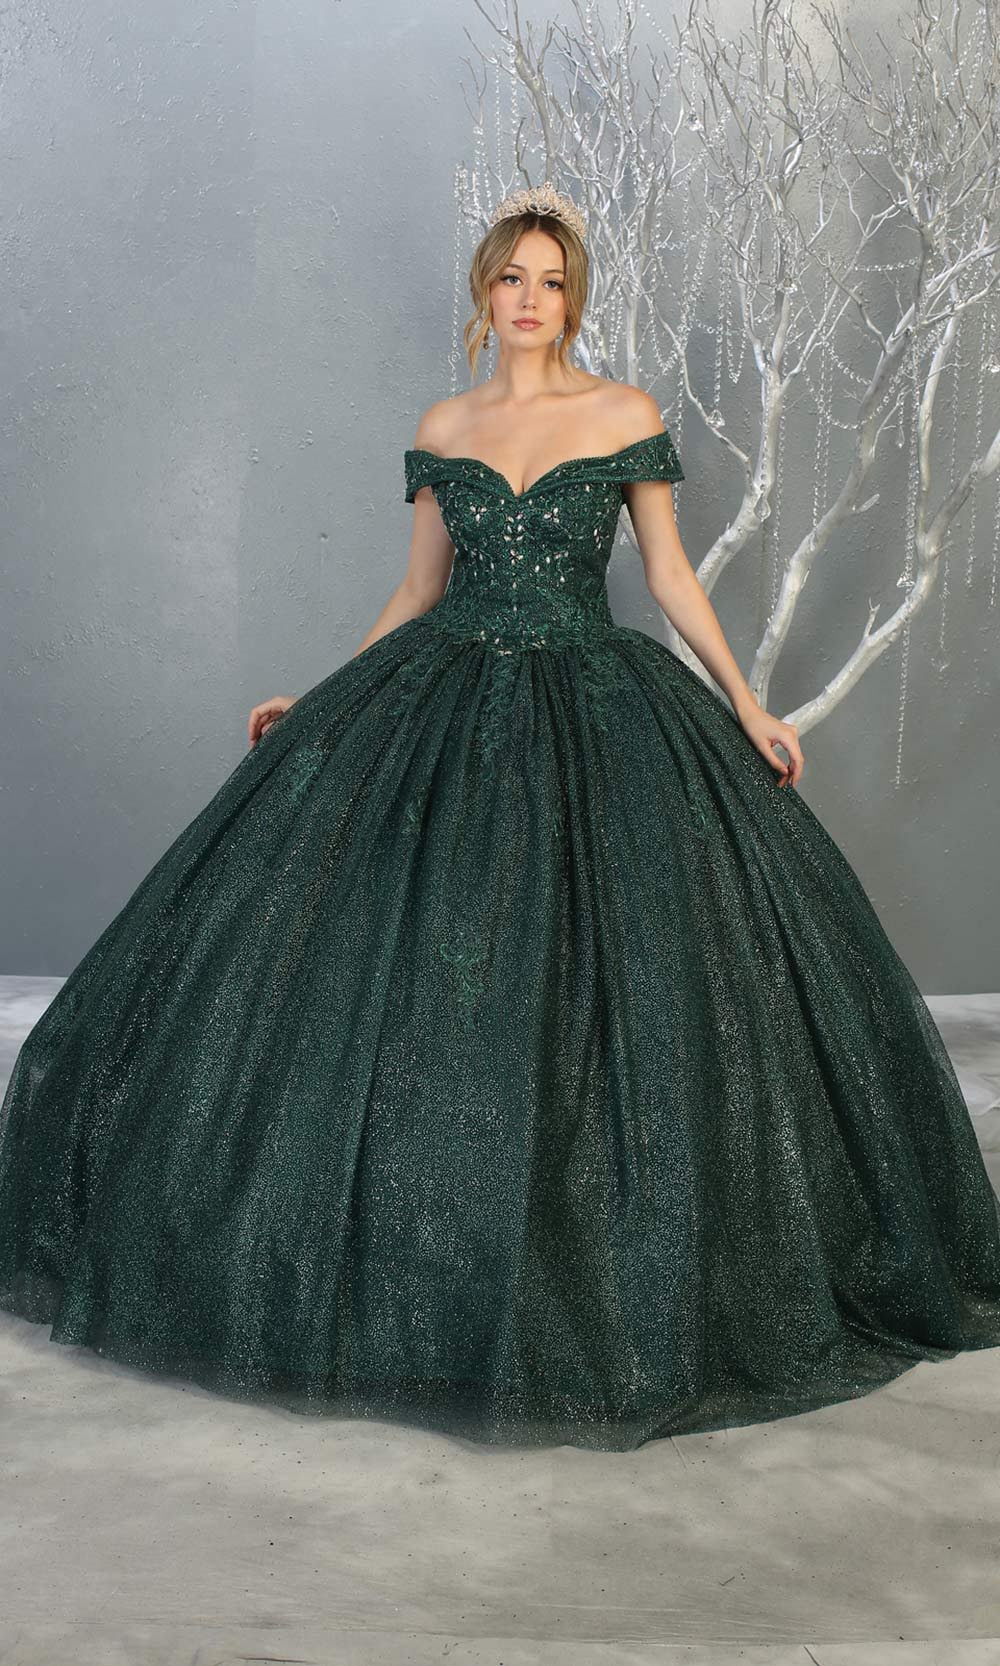 Mayqueen LK151 hunter green quinceanera off shoulder sequin ballgown. This green shiny ball gown is perfect for engagement dress, wedding reception, indowestern party gown, sweet 16, debut, sweet 15, sweet 18. Plus sizes available for ballgowns.jpg